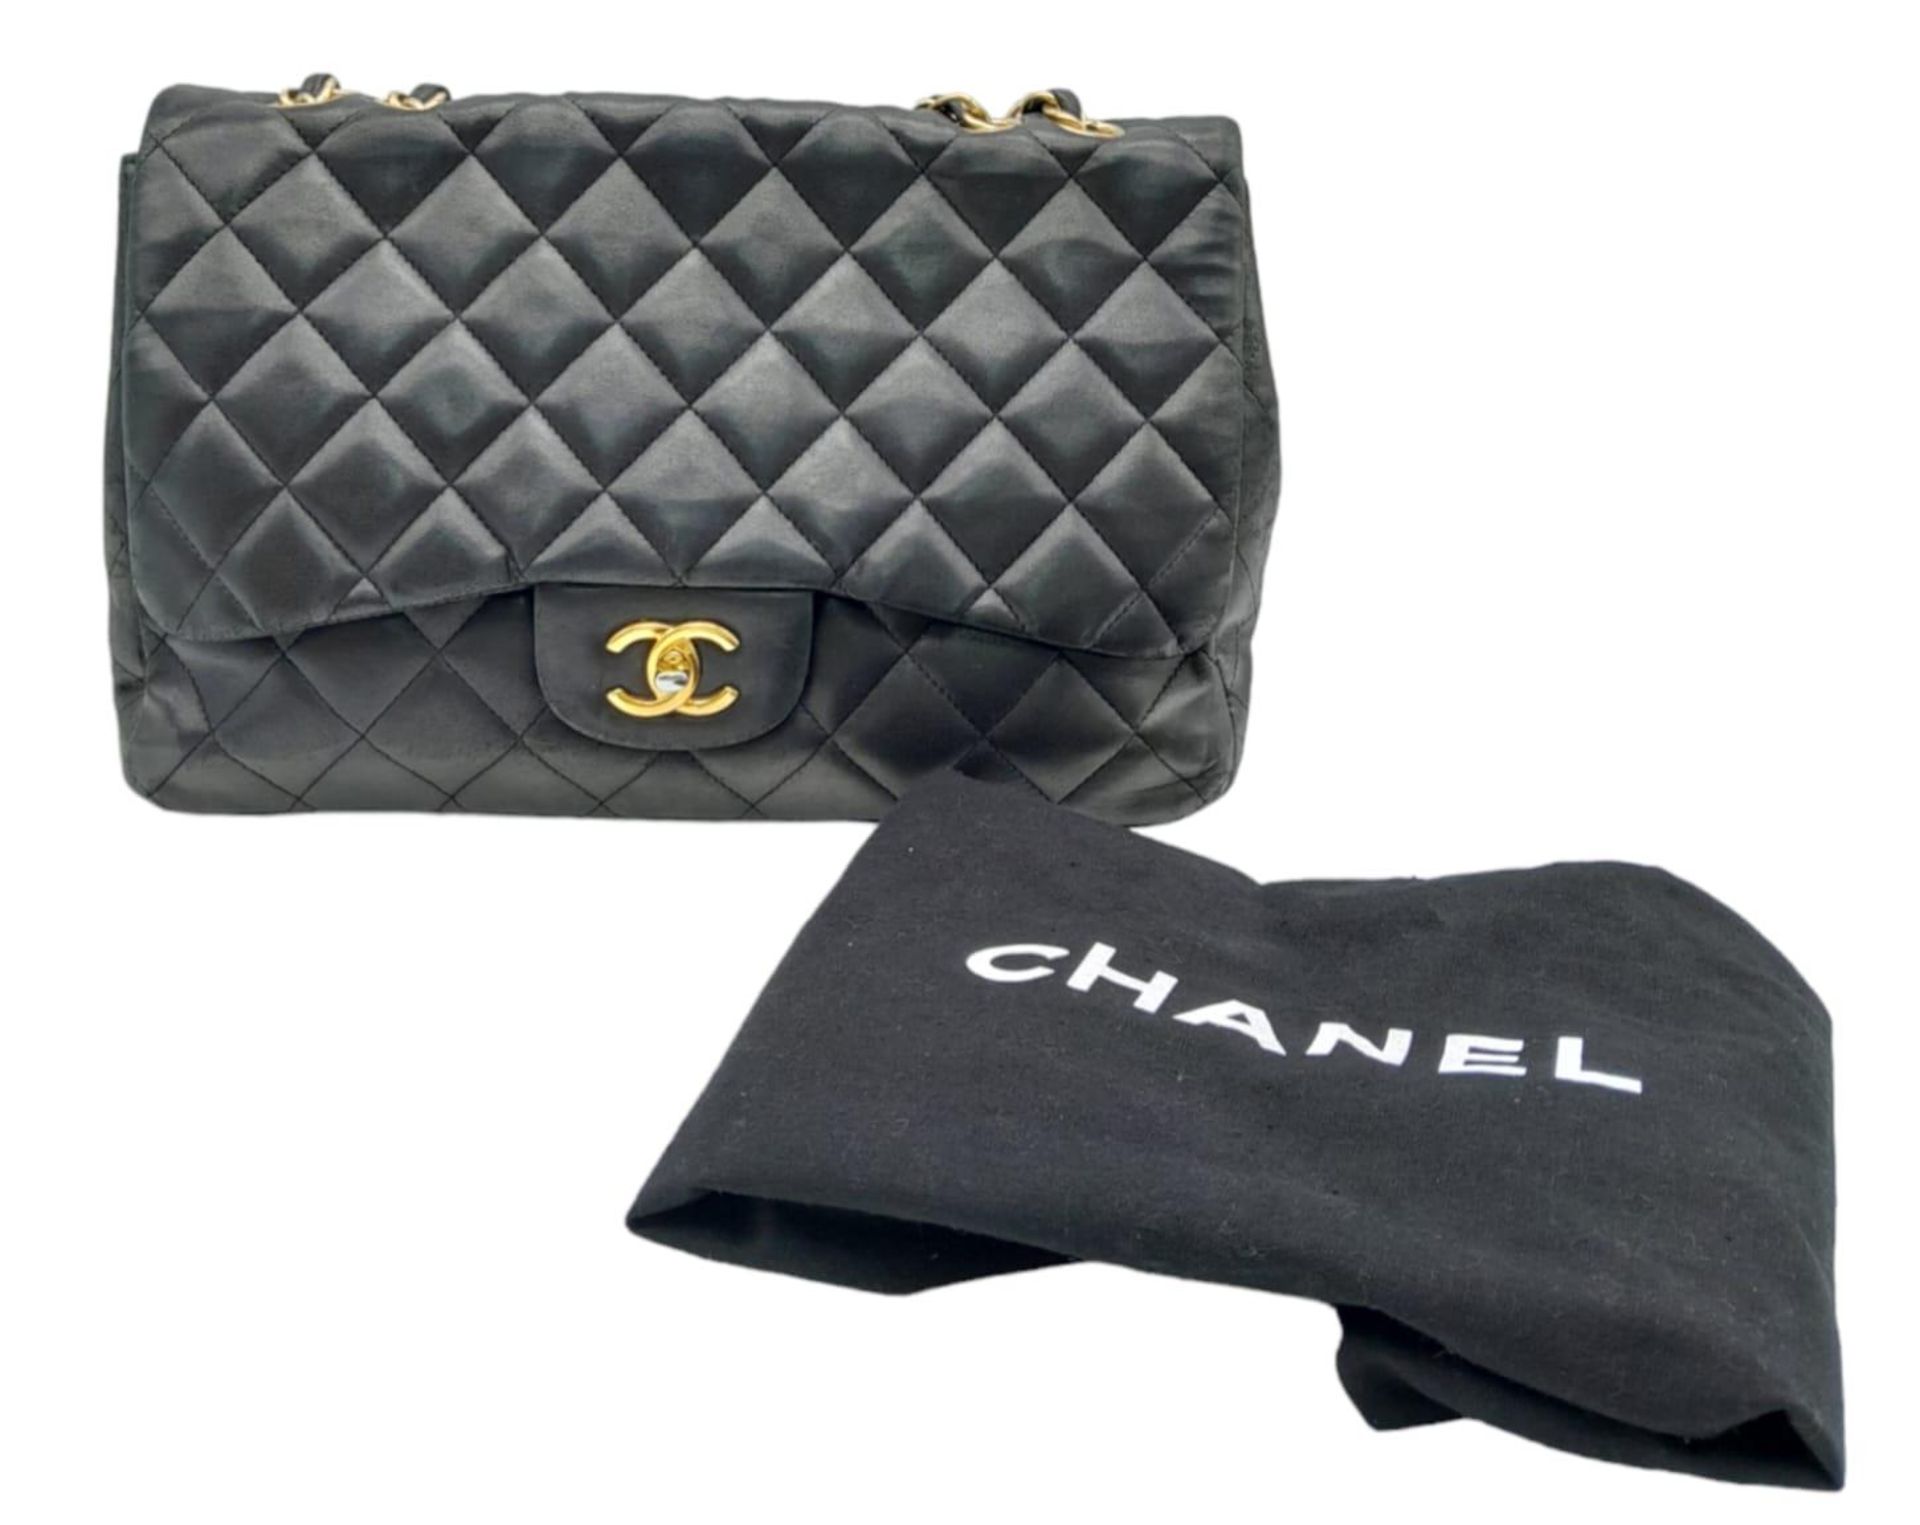 A Chanel Black Caviar Classic Single Flap Bag. Quilted pebbled leather exterior with gold-toned - Image 3 of 19